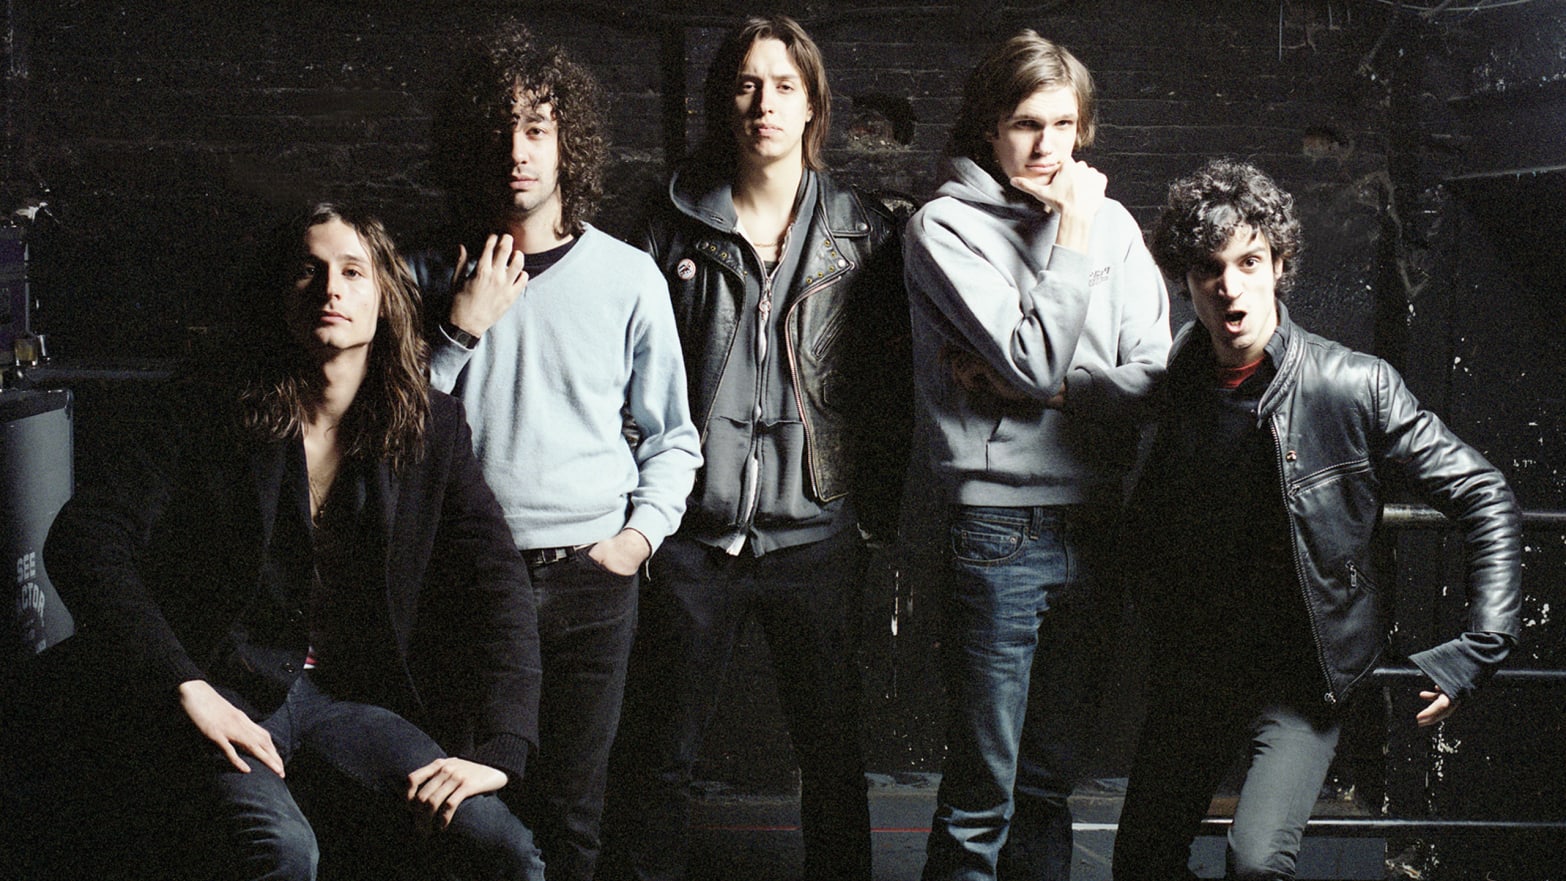 The Strokes' Is This It - Making the Most of What You Have